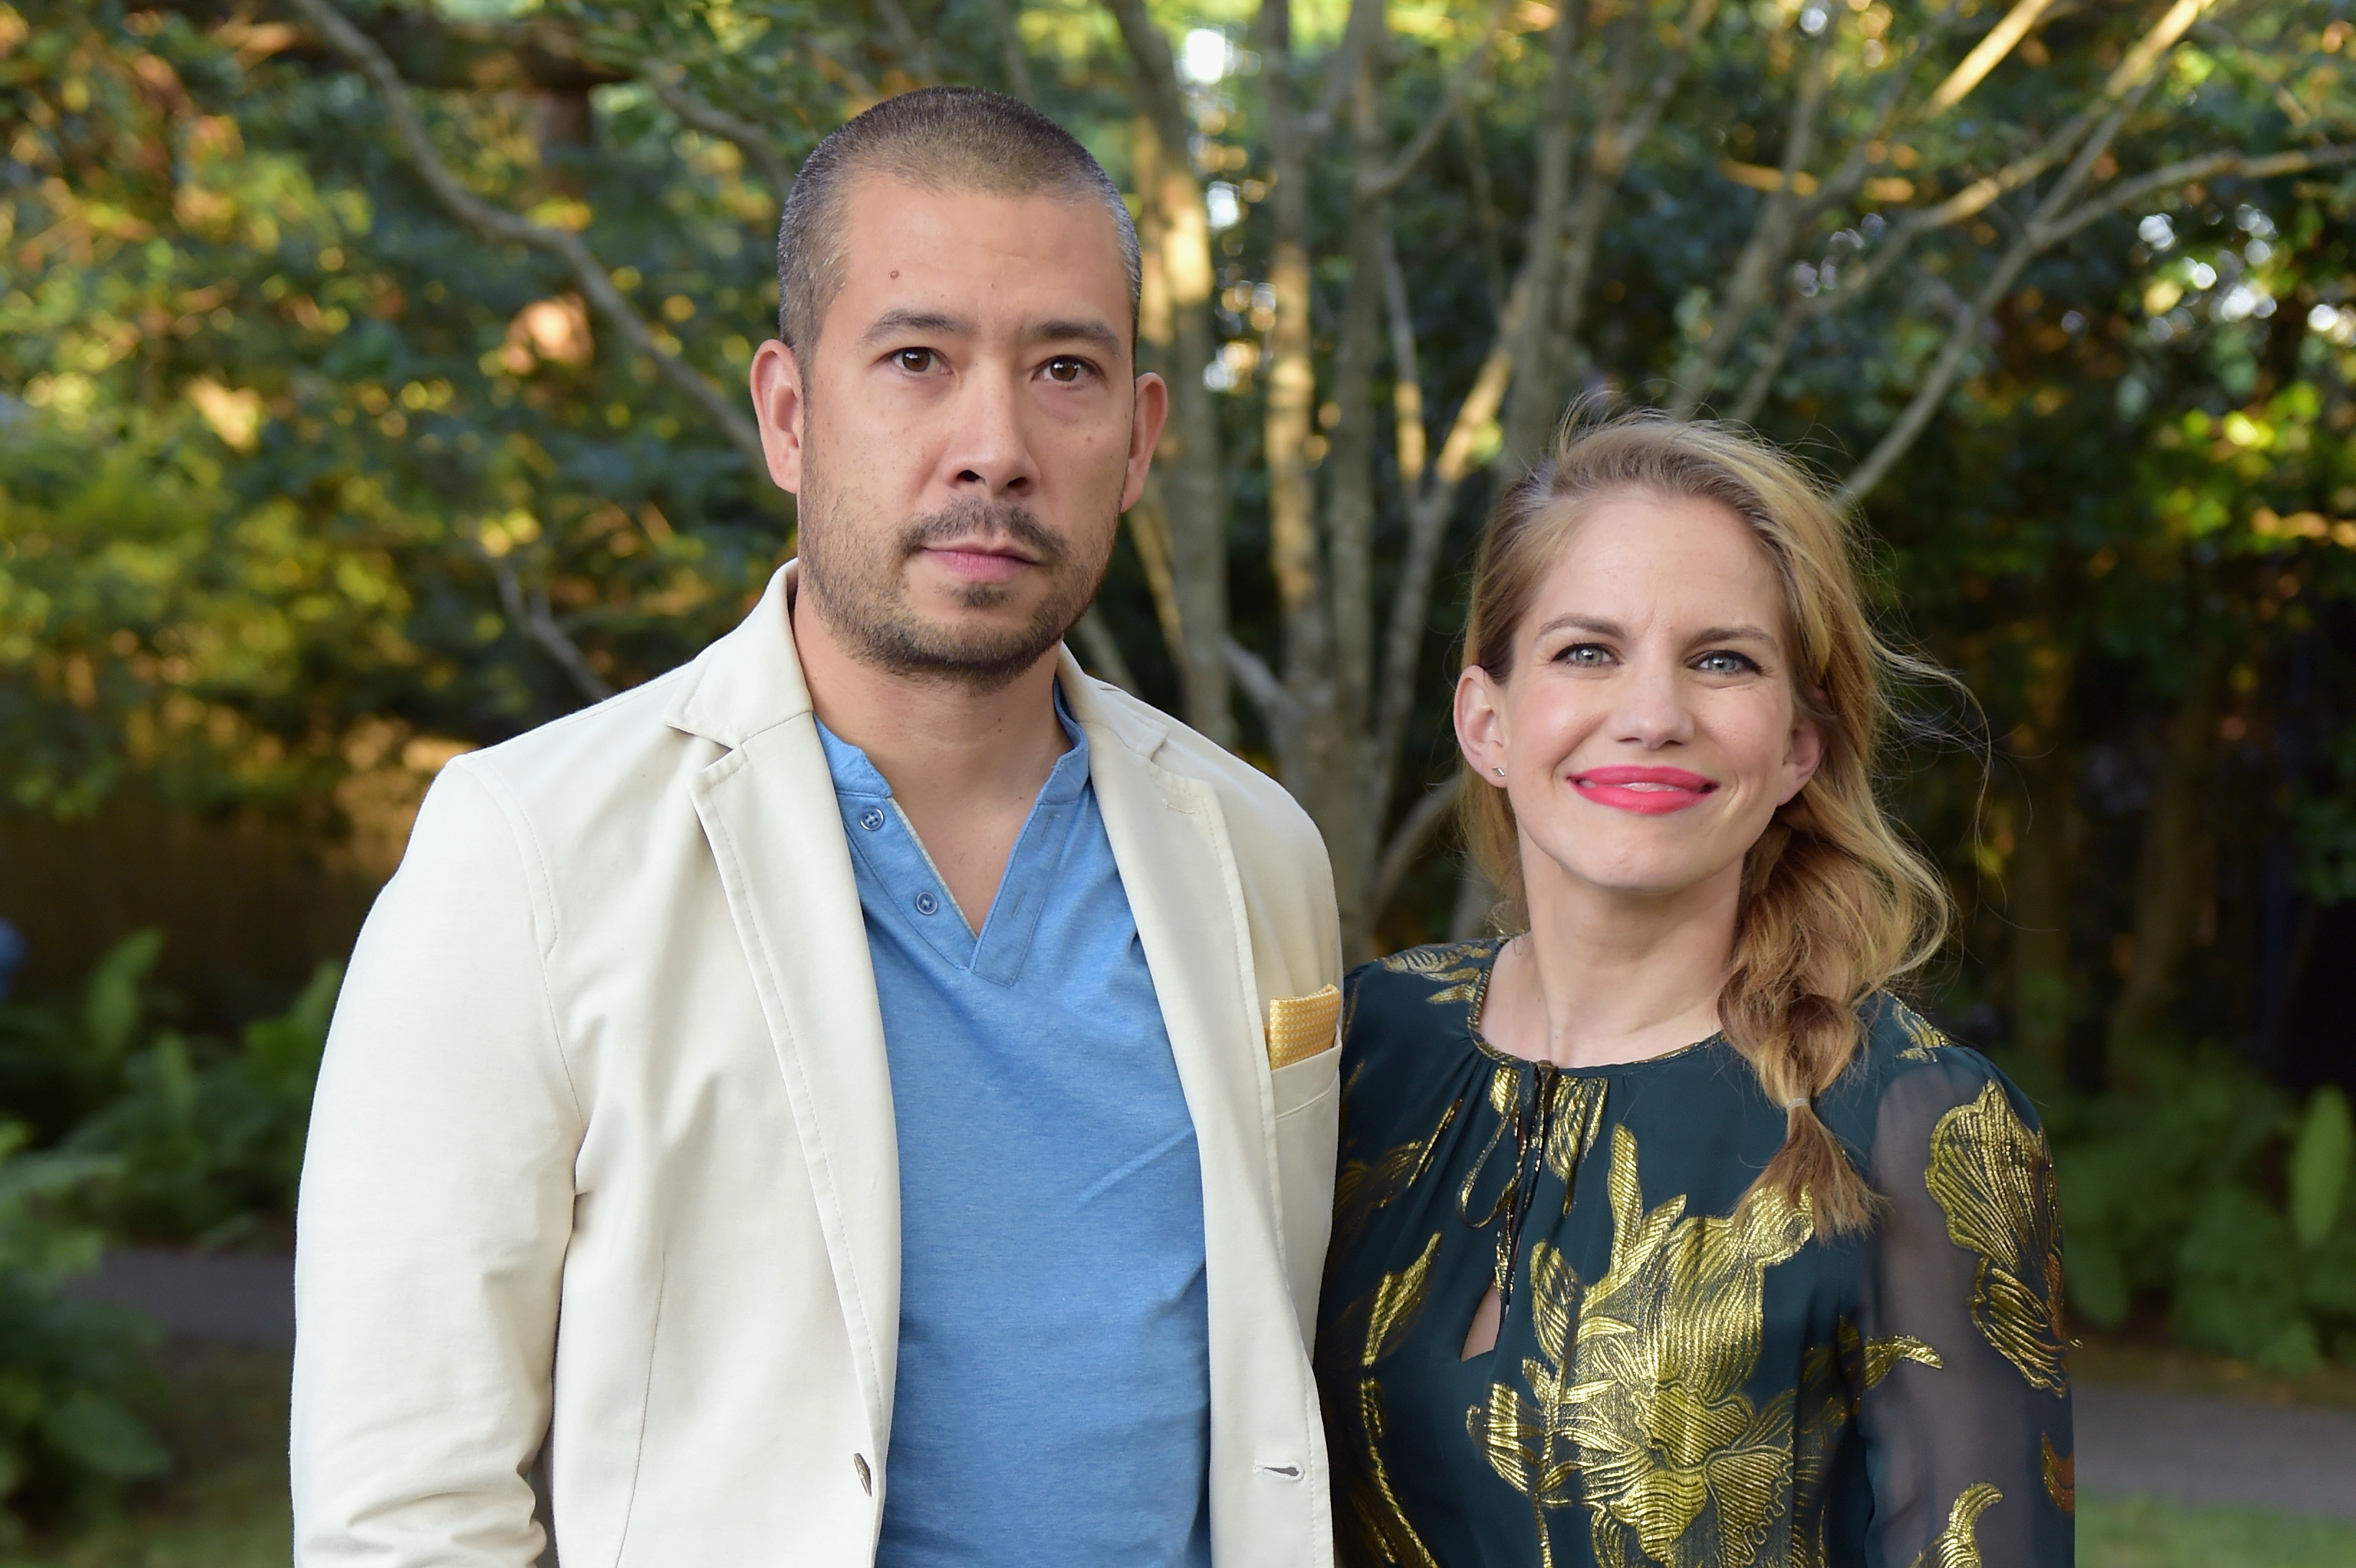 Shaun So and Anna Chlumsky attend The GOOD+ Foundation's Hamptons Summer Dinner co-hosted by Net-A-Porter on July 29, 2017, in East Hampton, New York. | Source: Getty Images